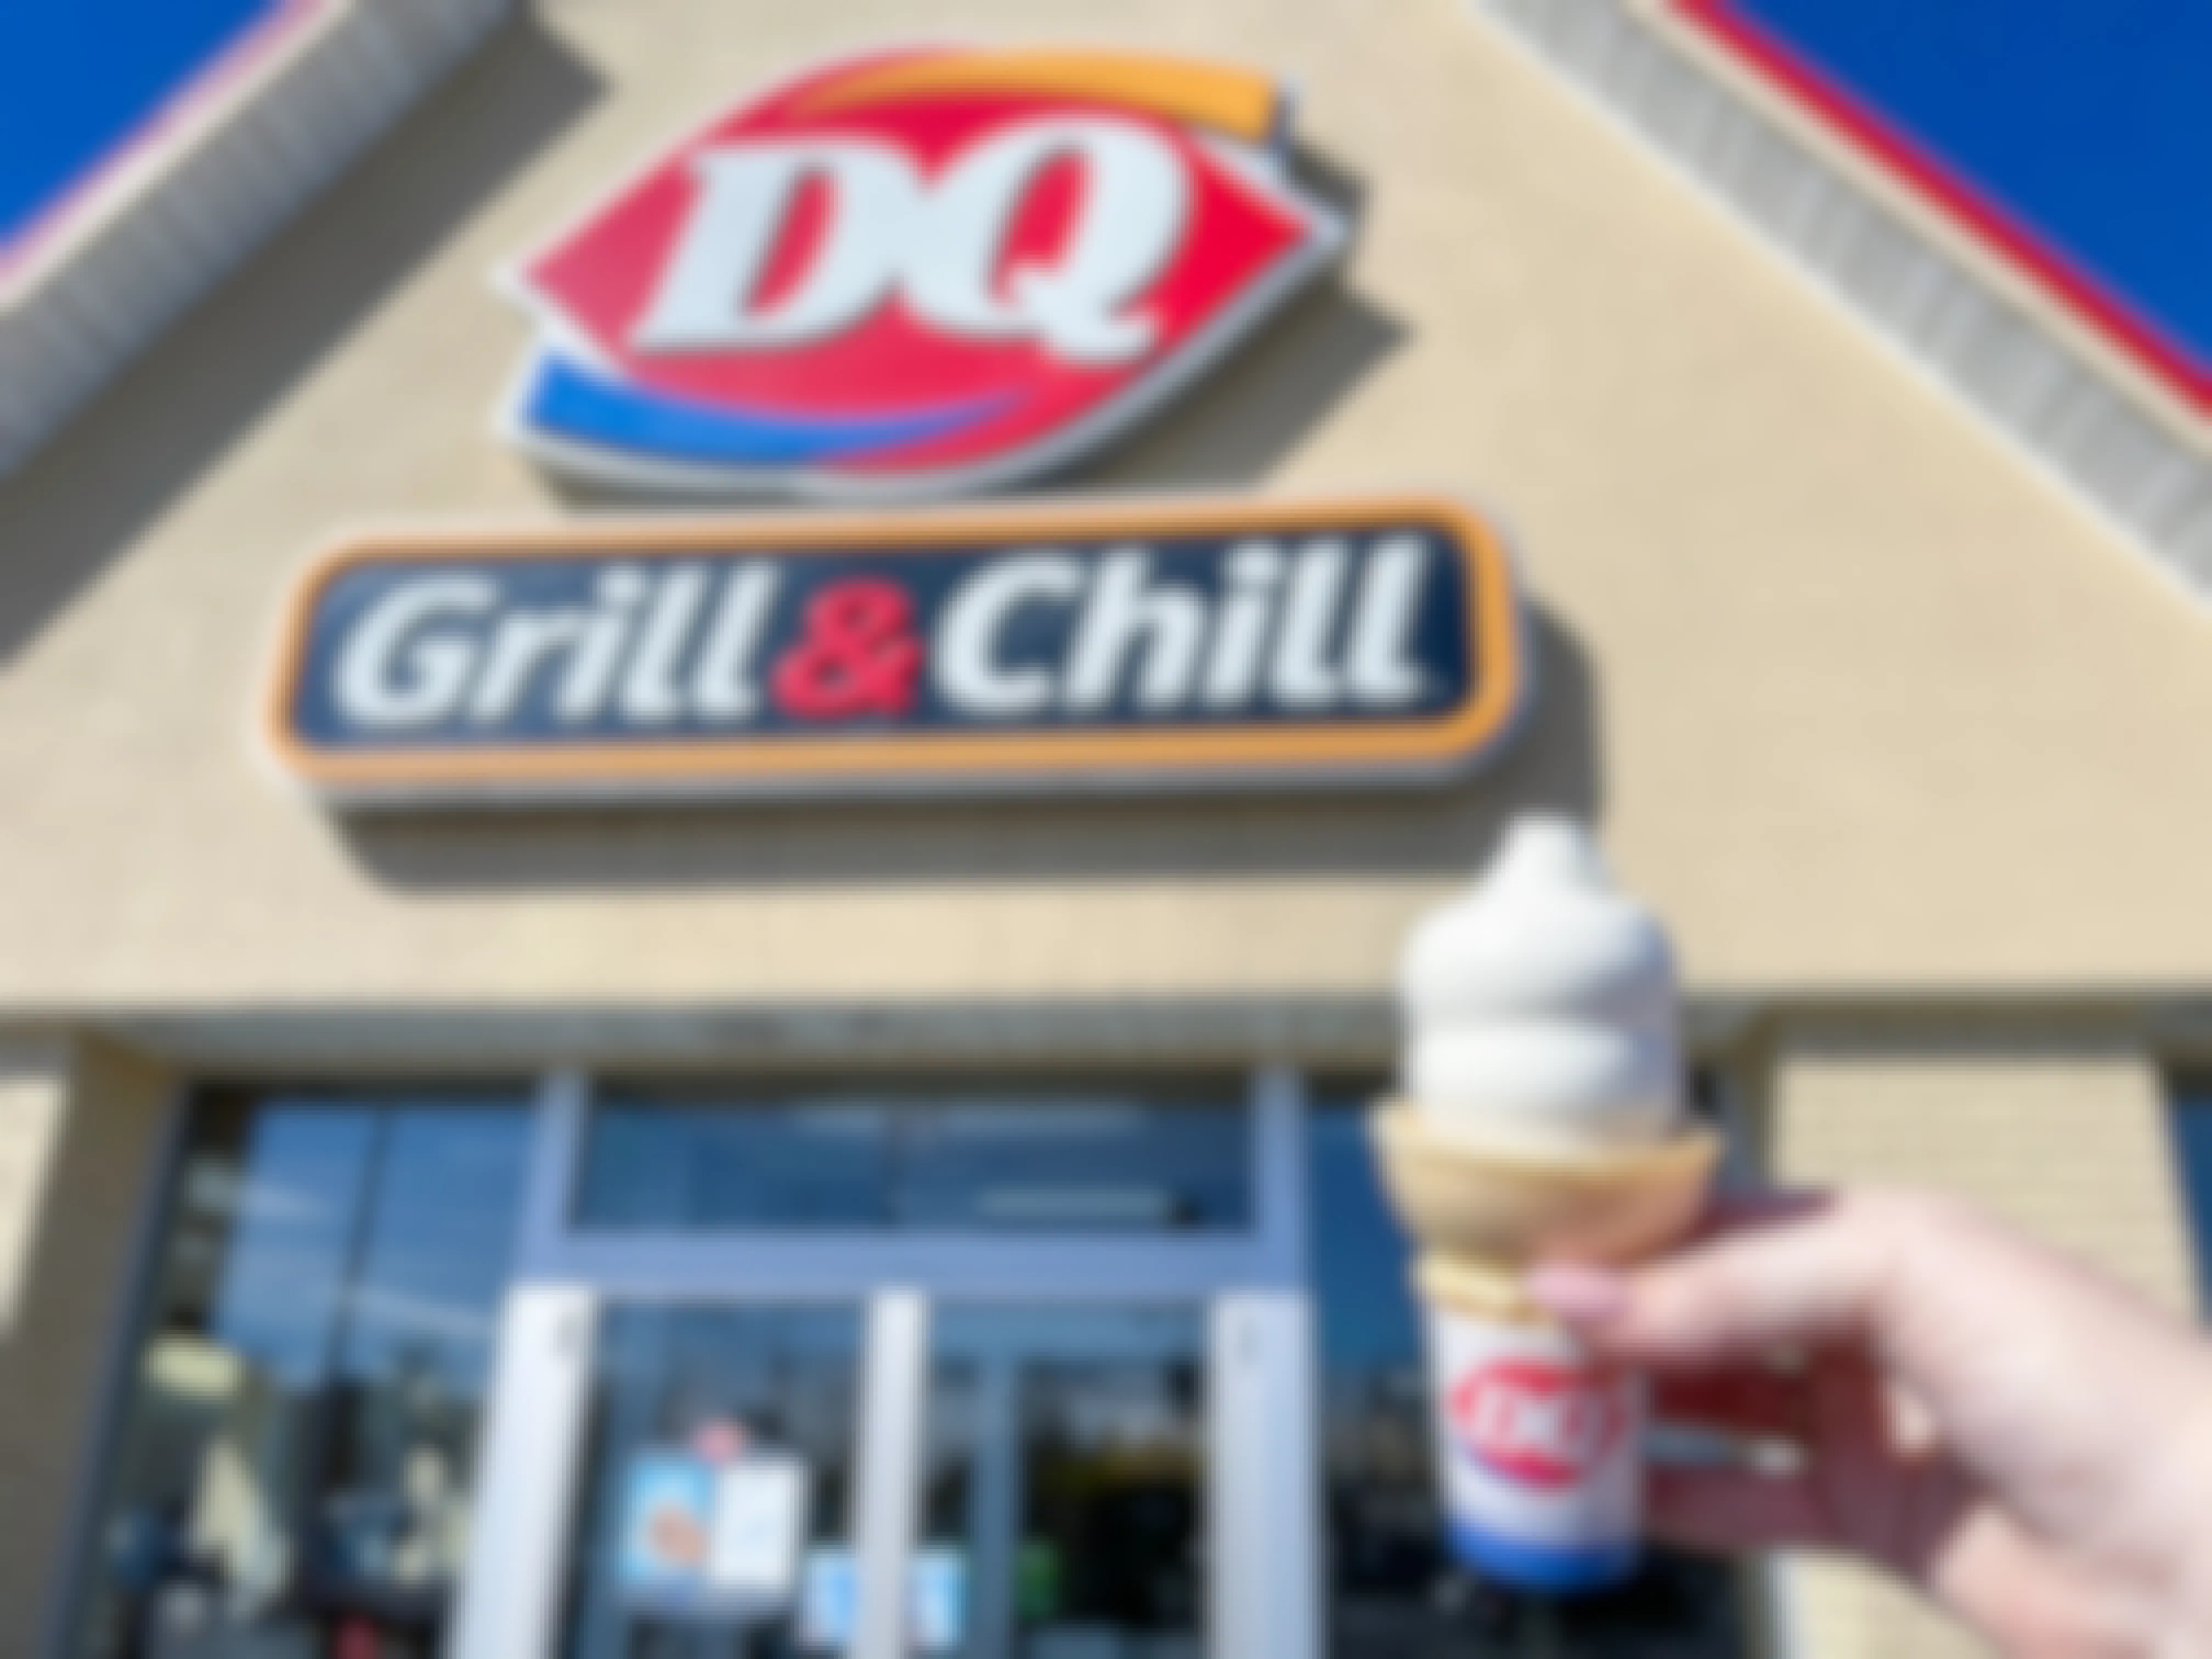 Someone holding a Dairy Queen soft serve cone in front of a Dairy Queen storefront.